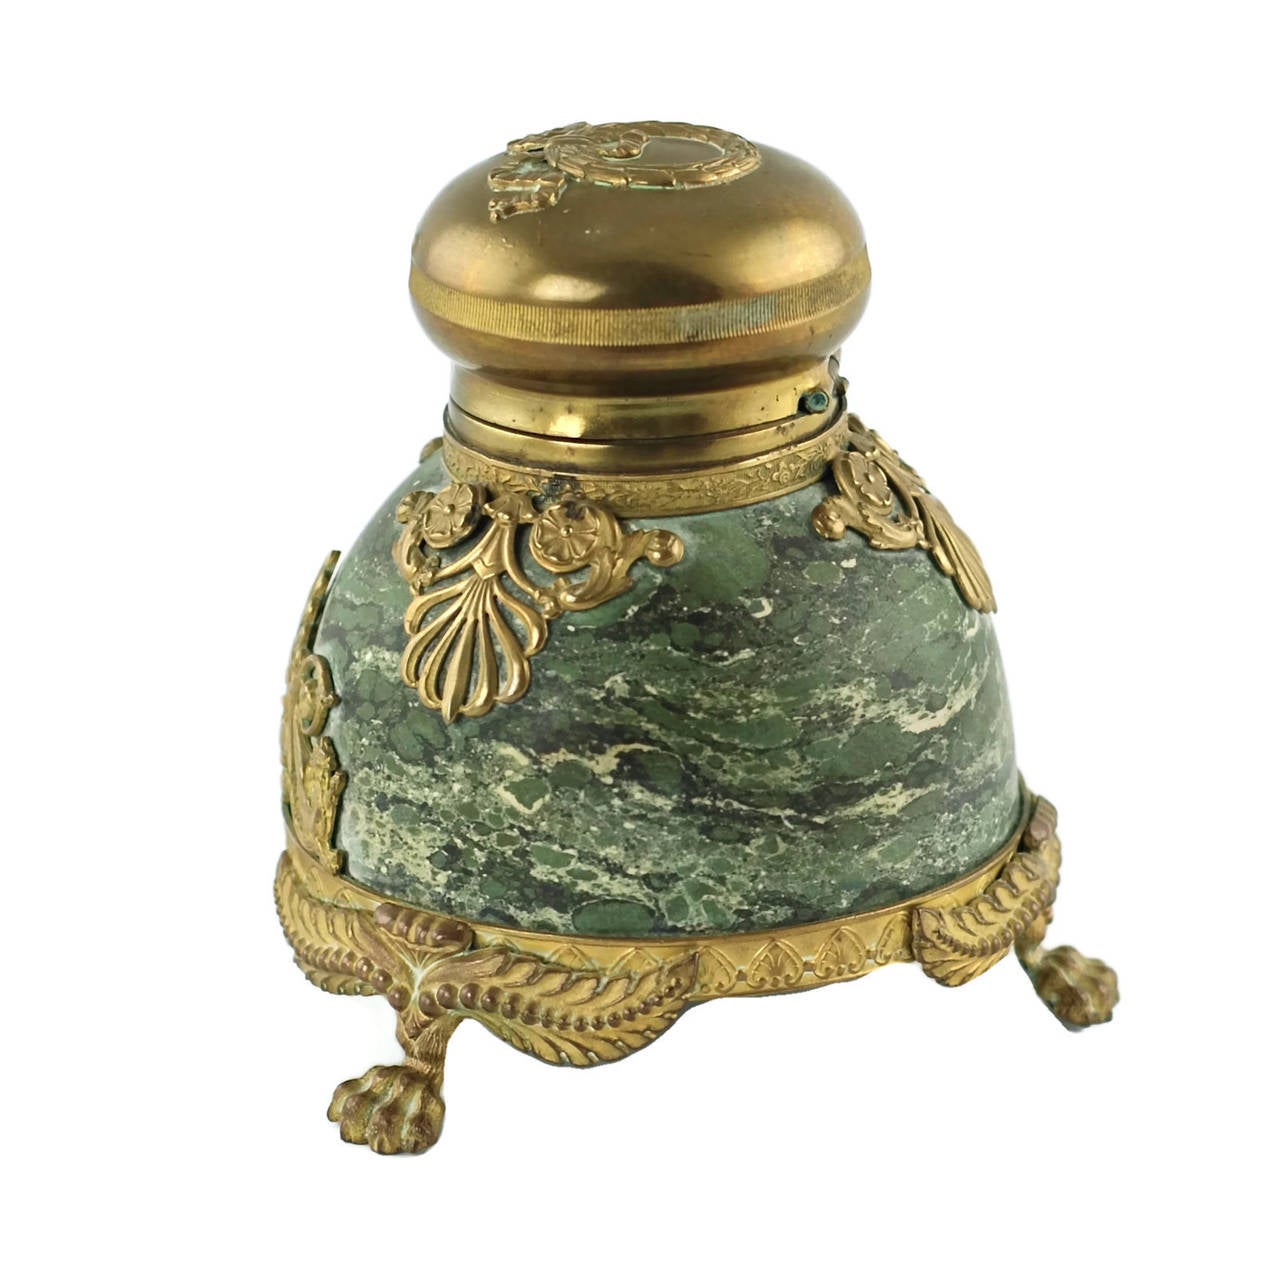 This 19th century French Empire inkwell is composed of richly veined Verde Antico marble finished in a dome shape with ornate bronze doré floral and foliate mounts. The front of the piece also features a pair of gryphon accents which flank a